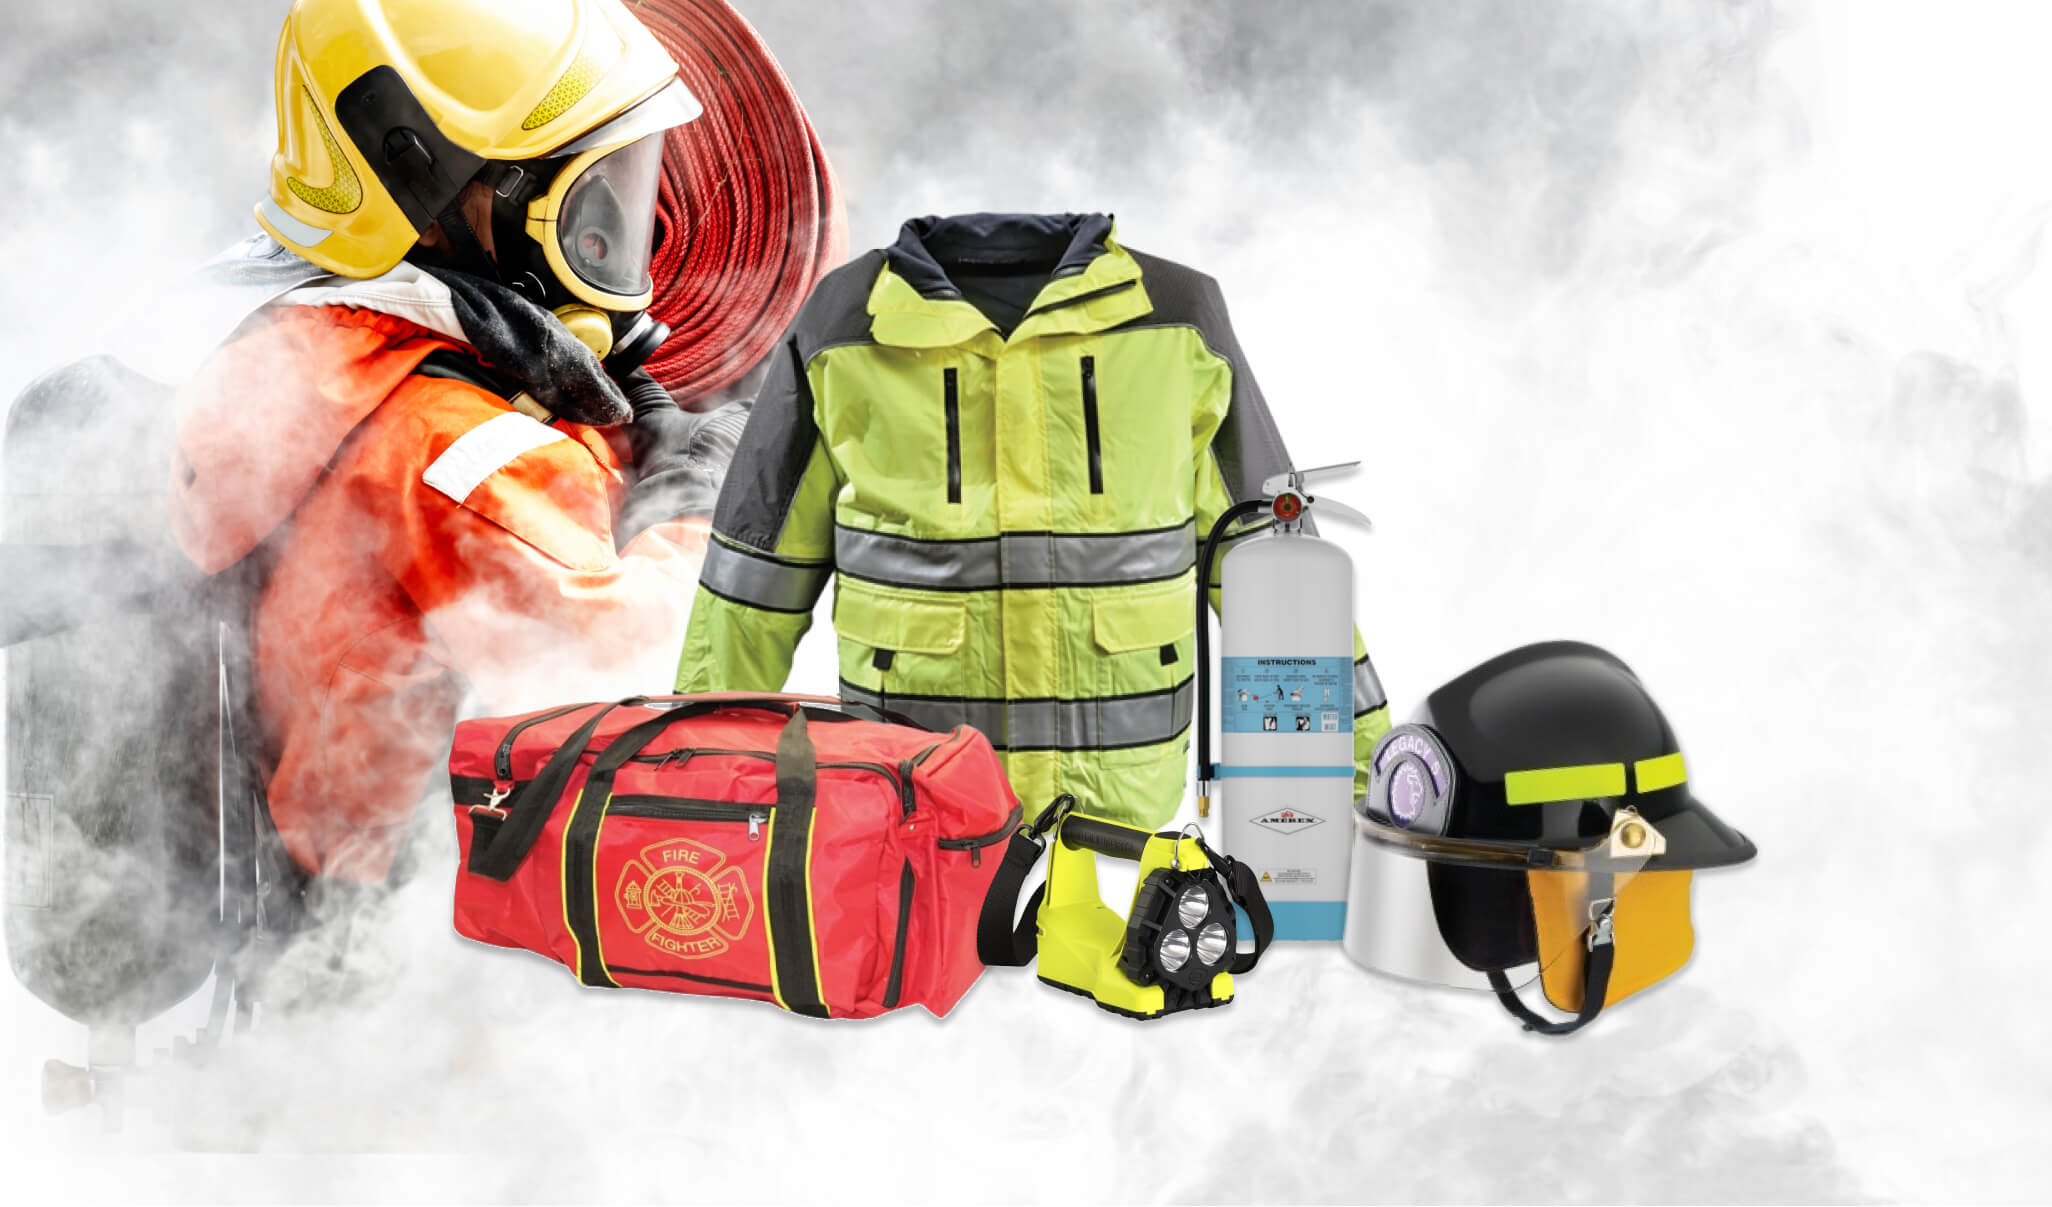 Firefighter Tools, Gear, & Accessories